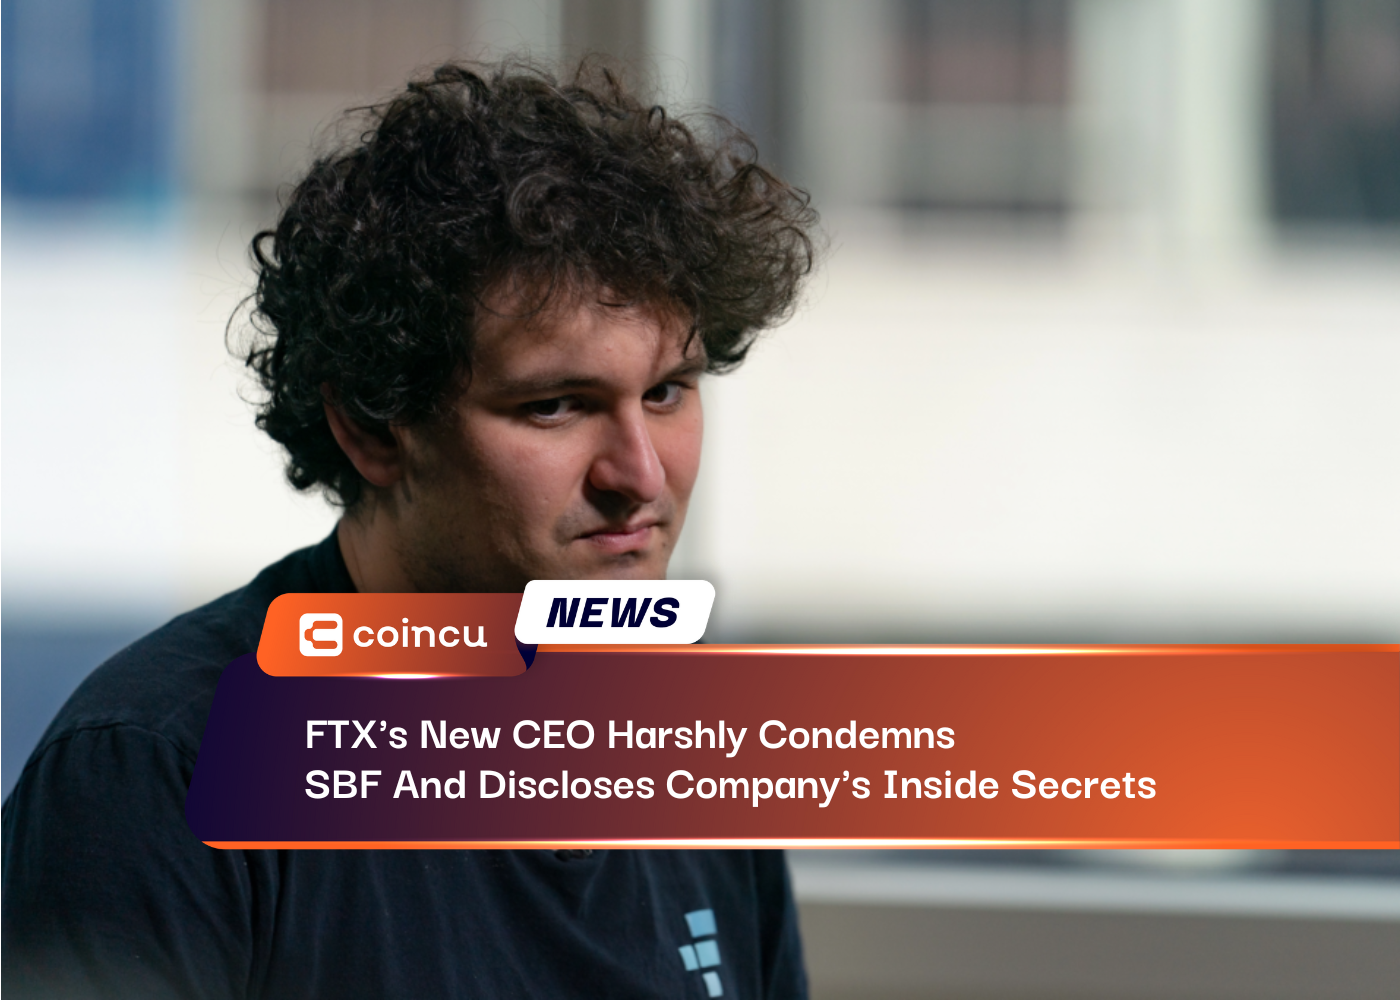 FTX's New CEO Harshly Condemns SBF And Discloses Company's Inside Secrets